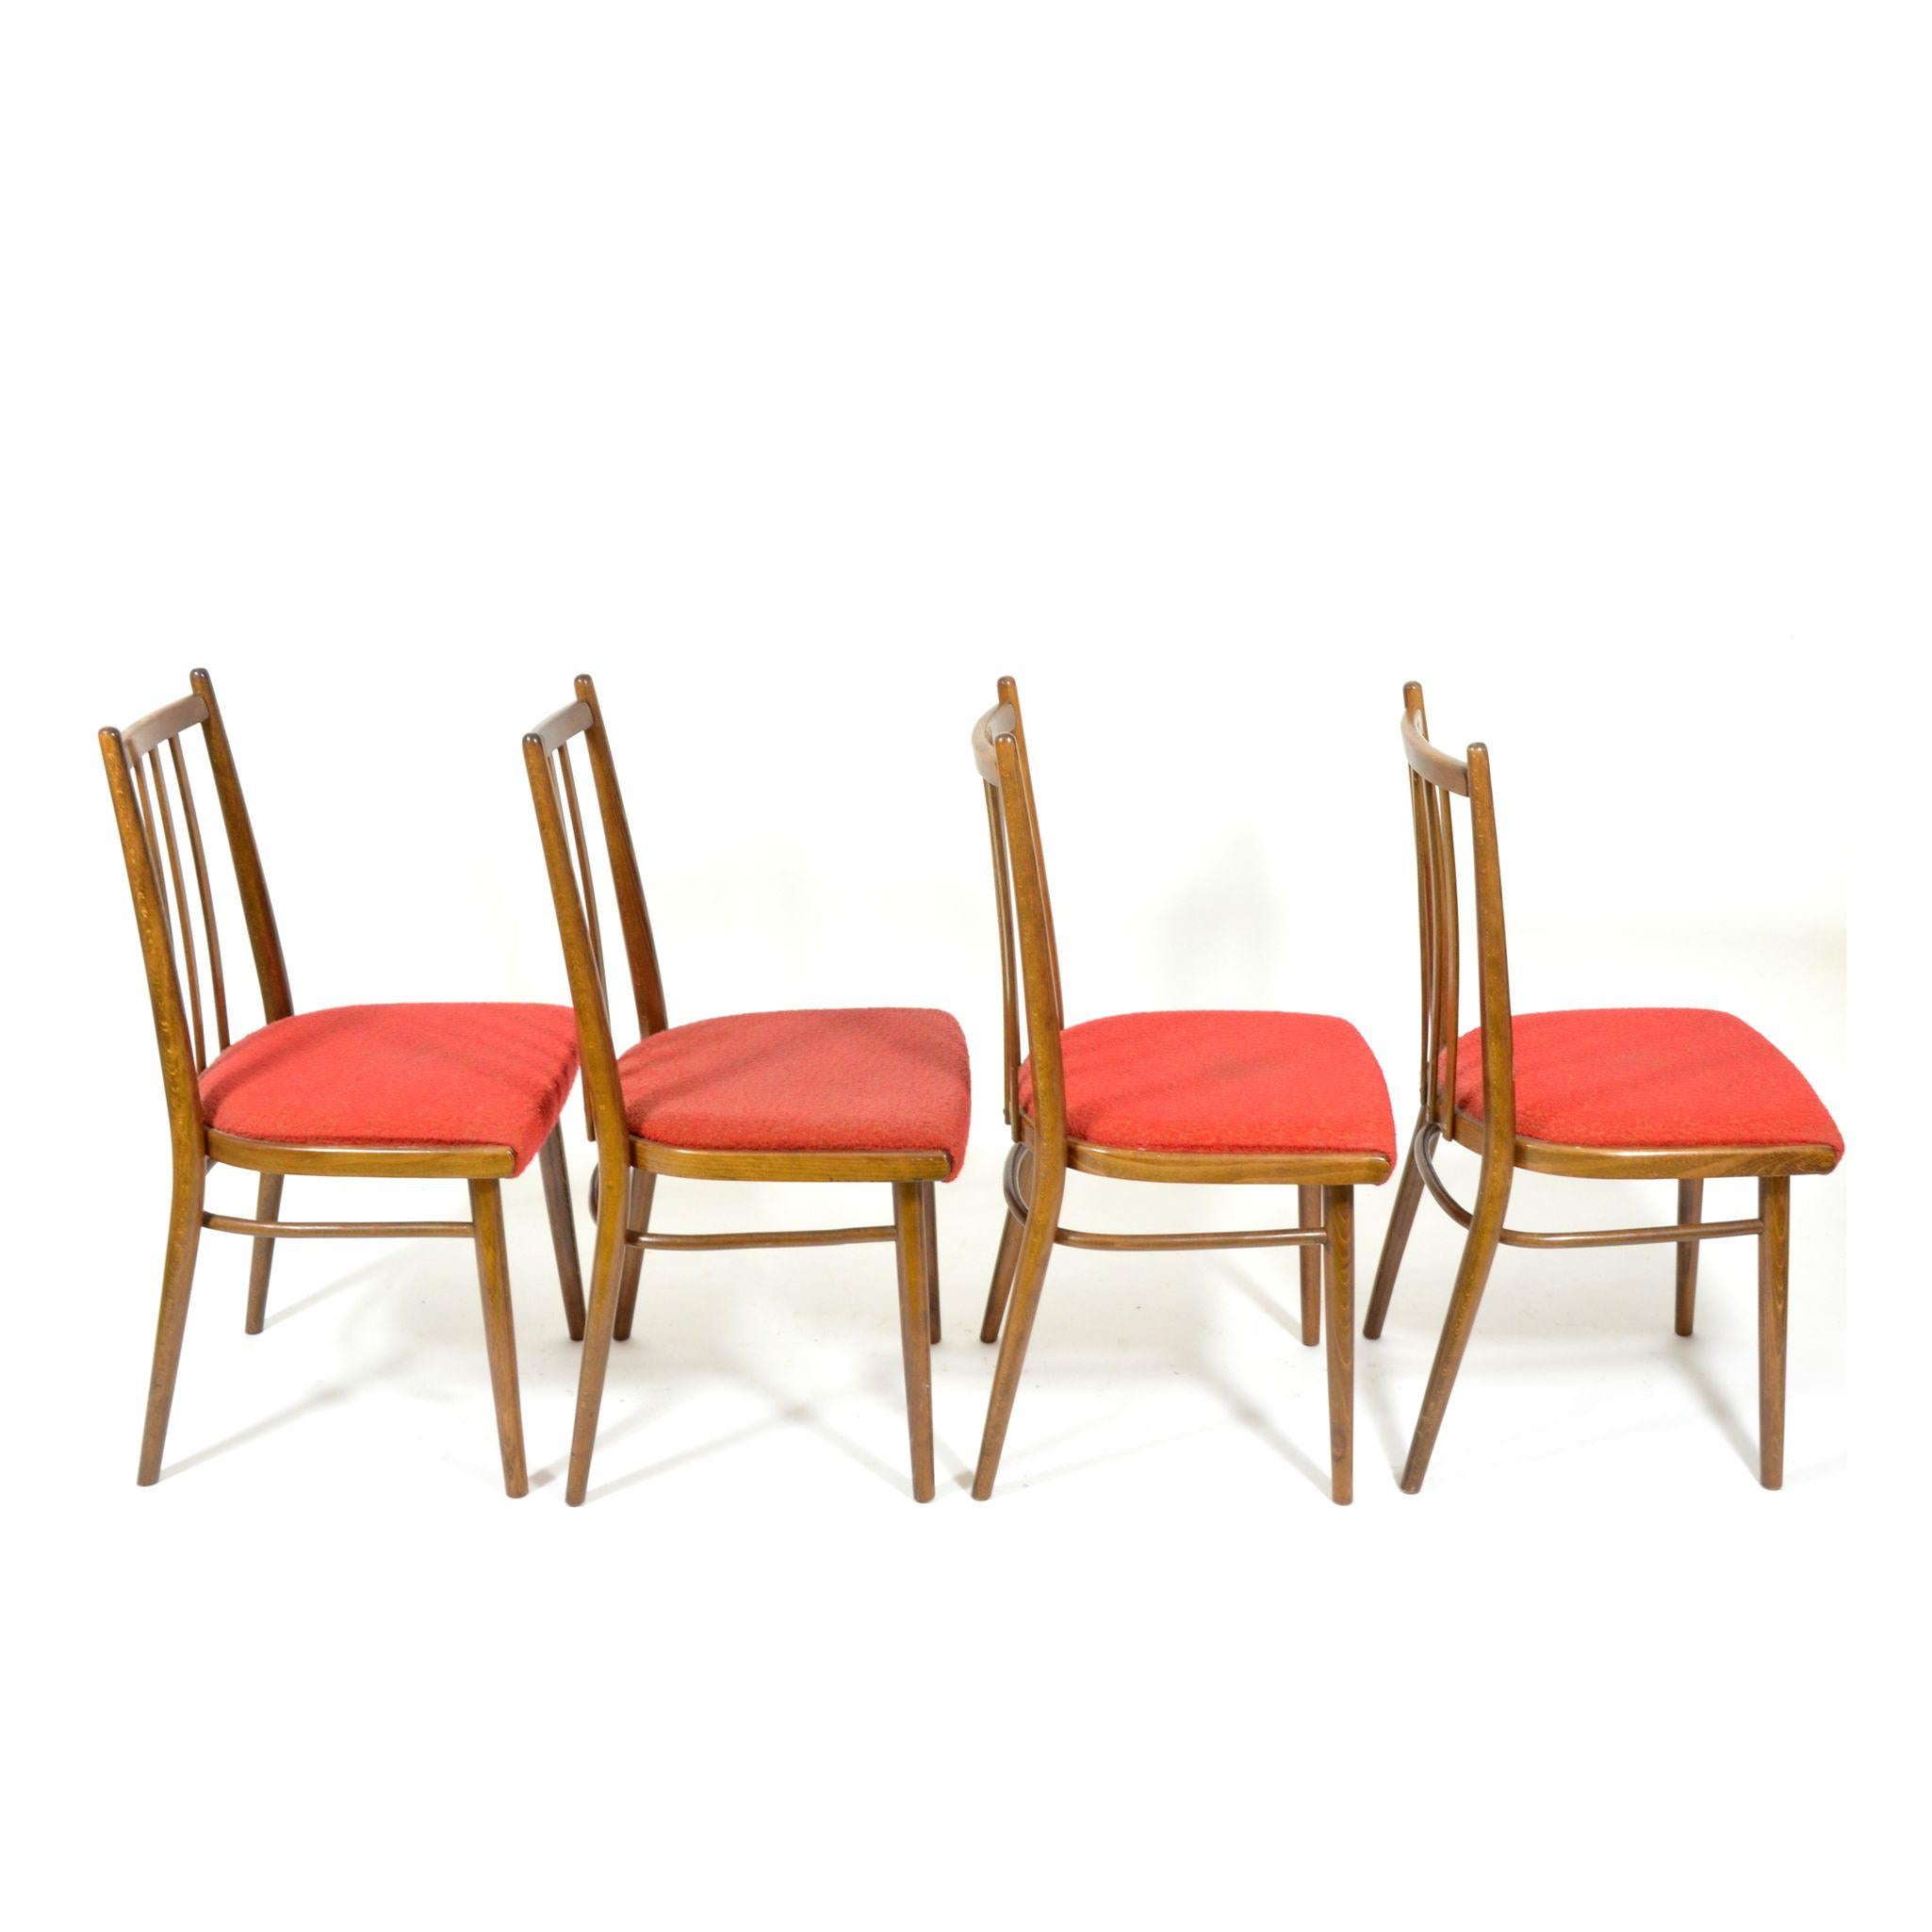 Late 20th Century Set of Four Vintage Dining Chairs, Red Upholstered, Czechoslovakia, 1970s For Sale